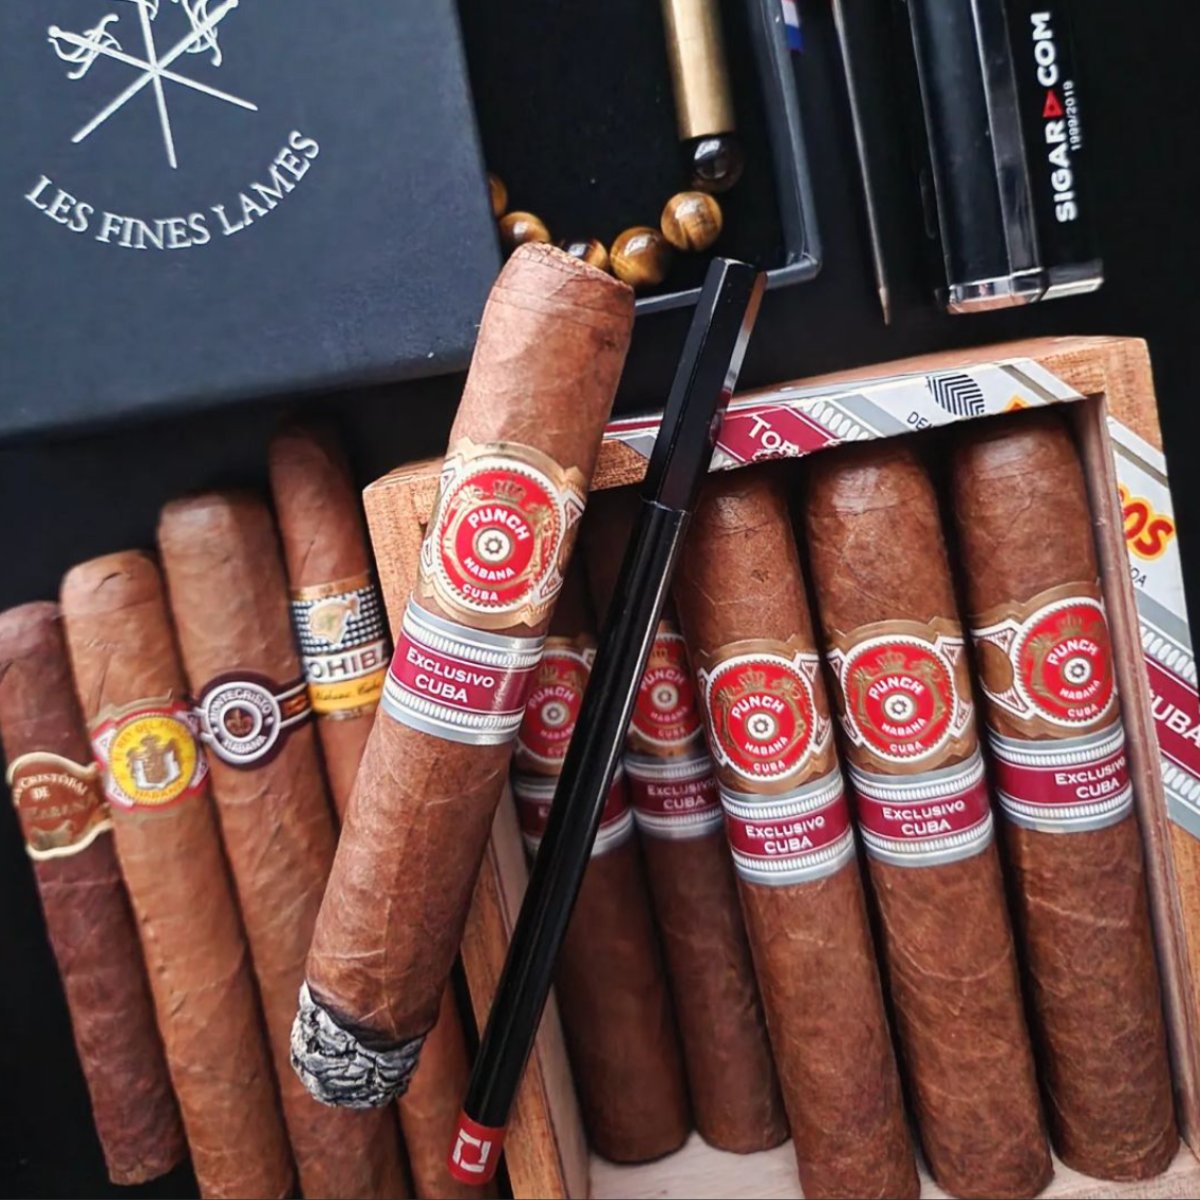 Shoutout for beating the mid-week blues with the #PerfecDraw at the ready! 🚀 Keep that draw smooth and the spirits high. Thanks for the tag! 

#CigarEssentials #MidweekMotivation #CigarLovers